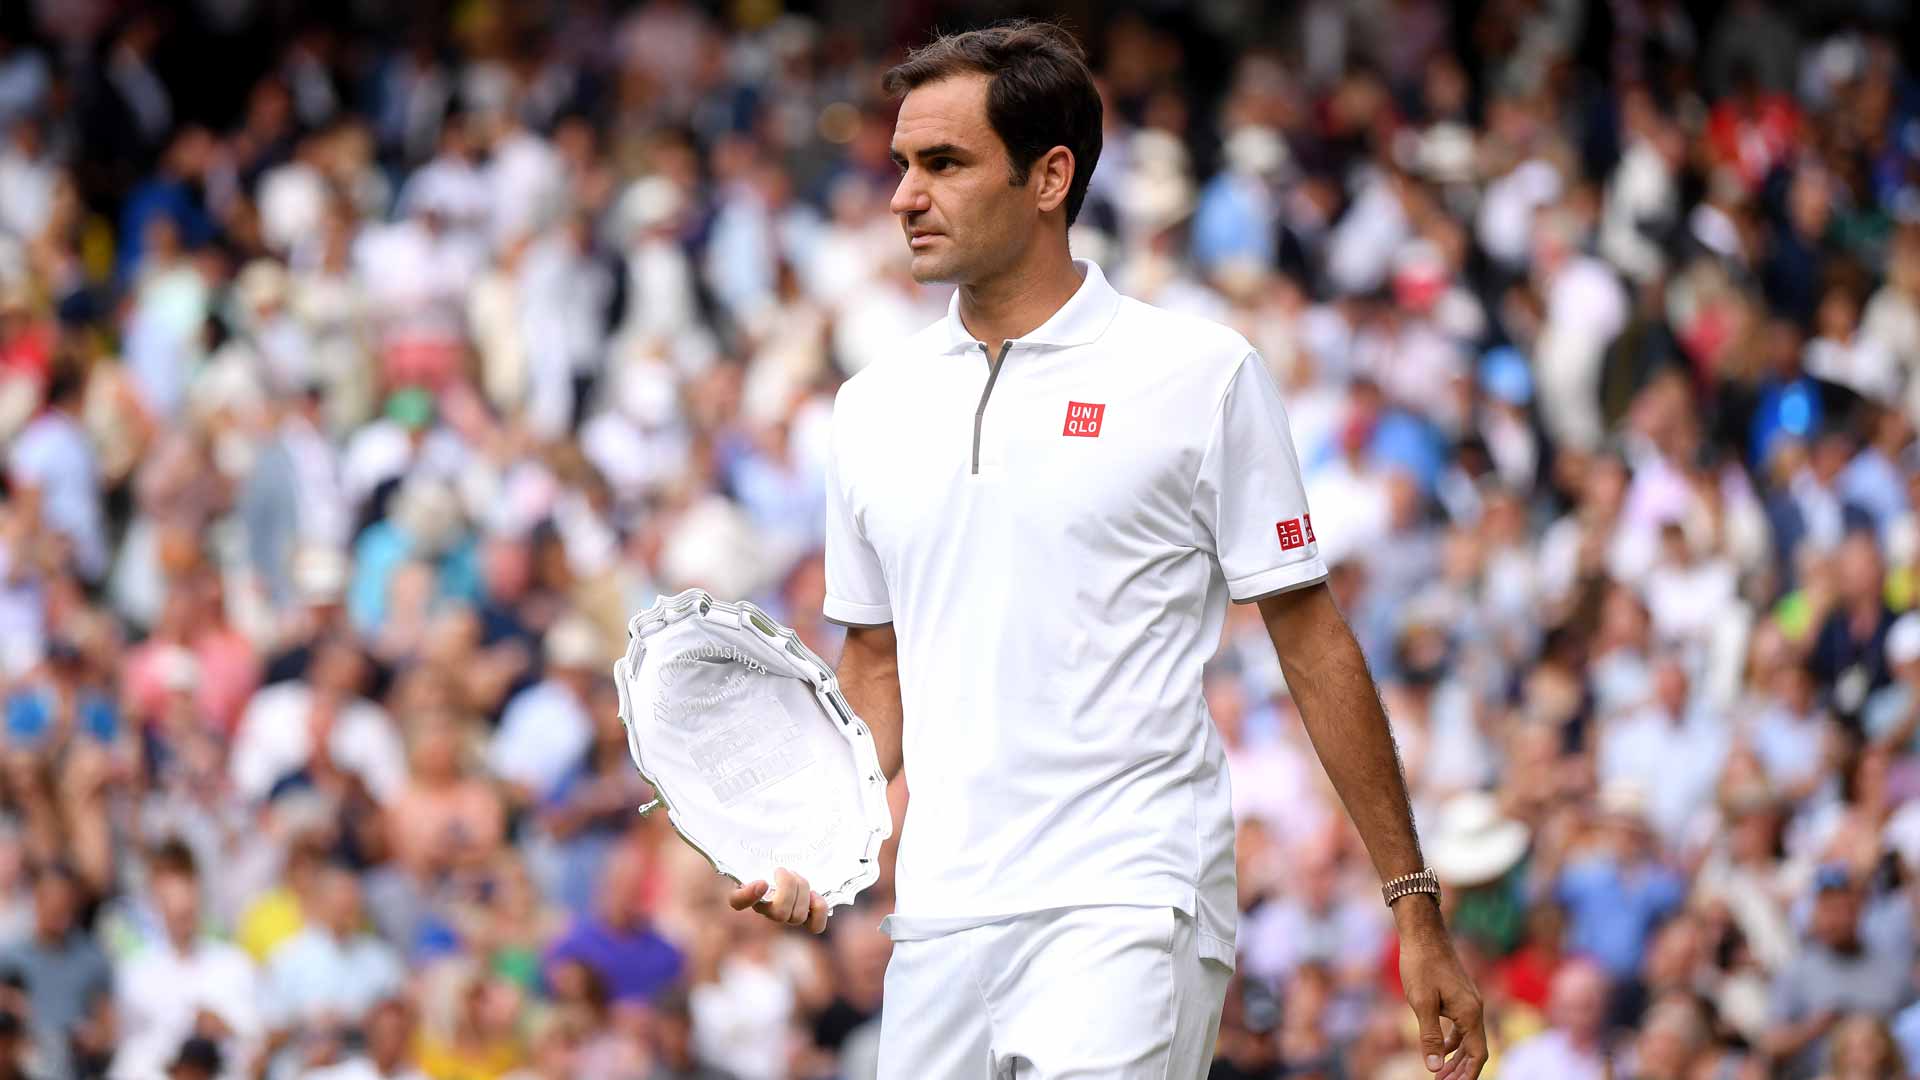 Roger Federer won 14 more points than Novak Djokovic in the Wimbledon final, but the Swiss fell short of the title.